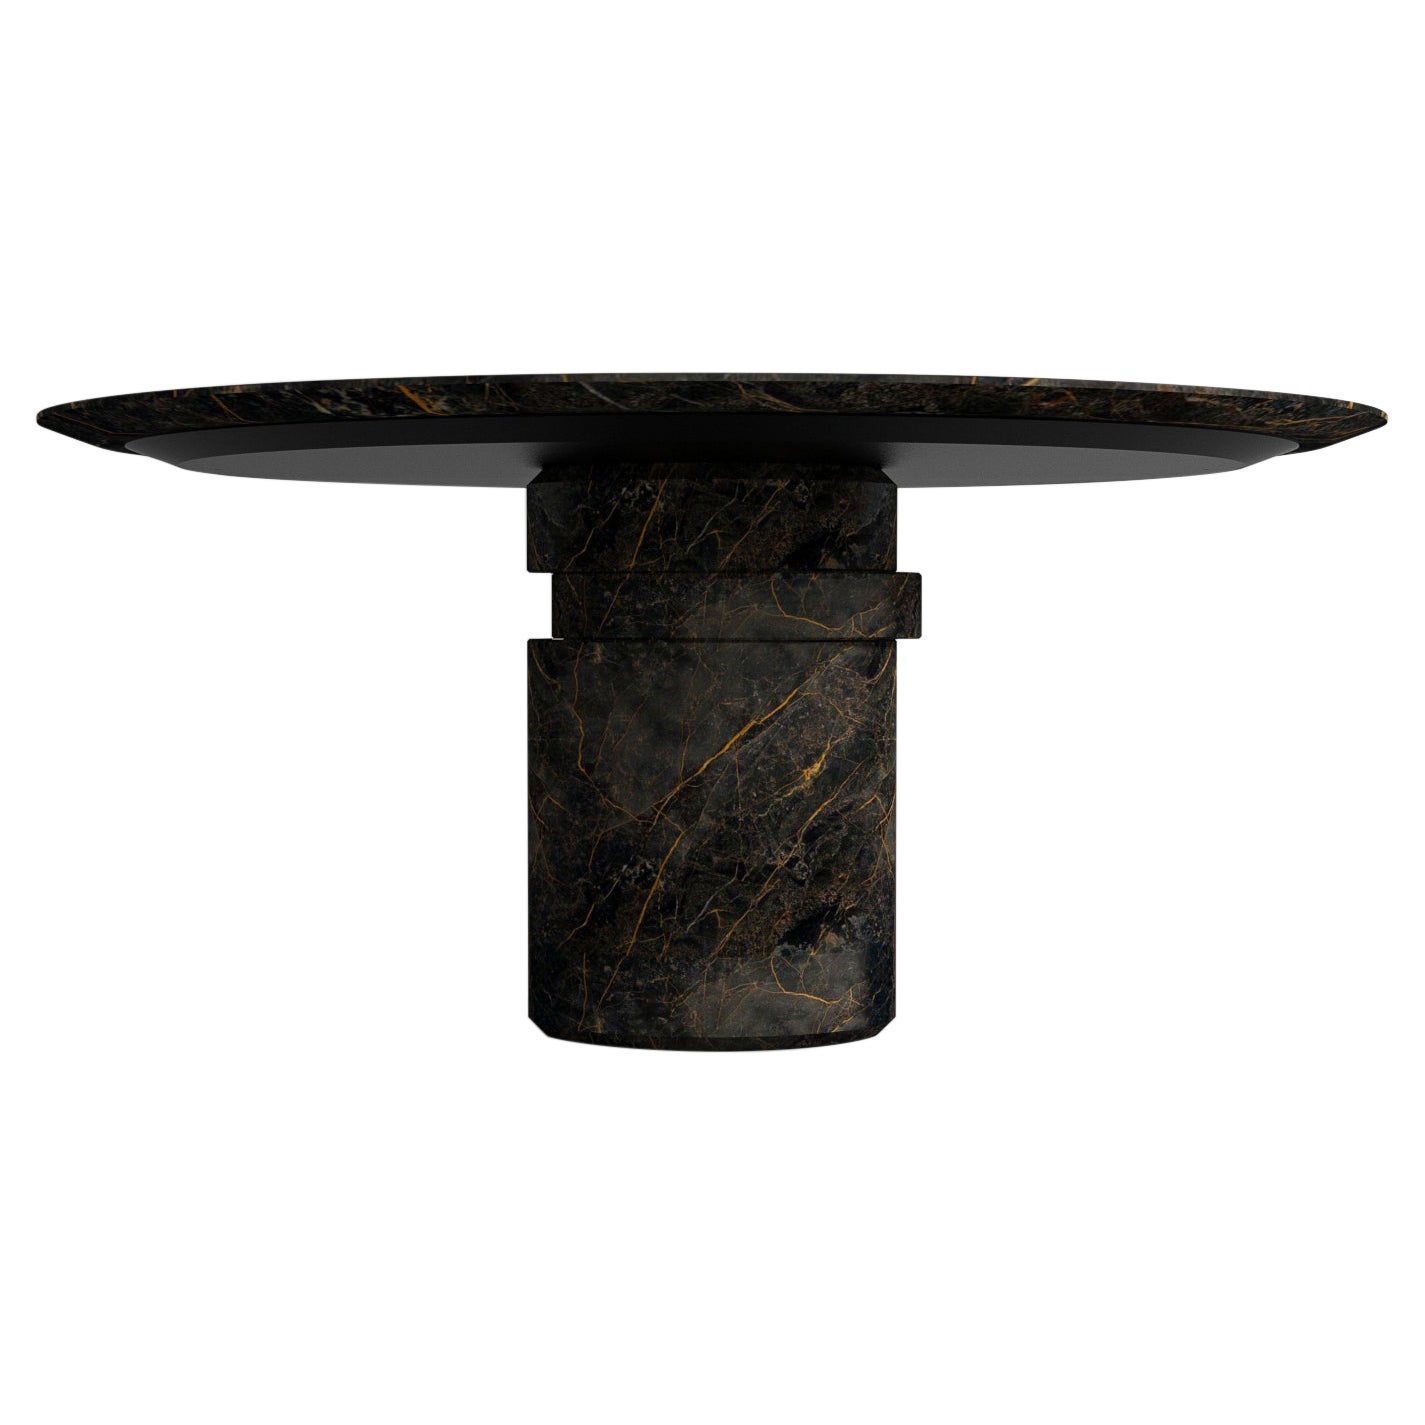 Contemporary Marble Dining Table M, Port Laurent, Disc Table by Barh.Design